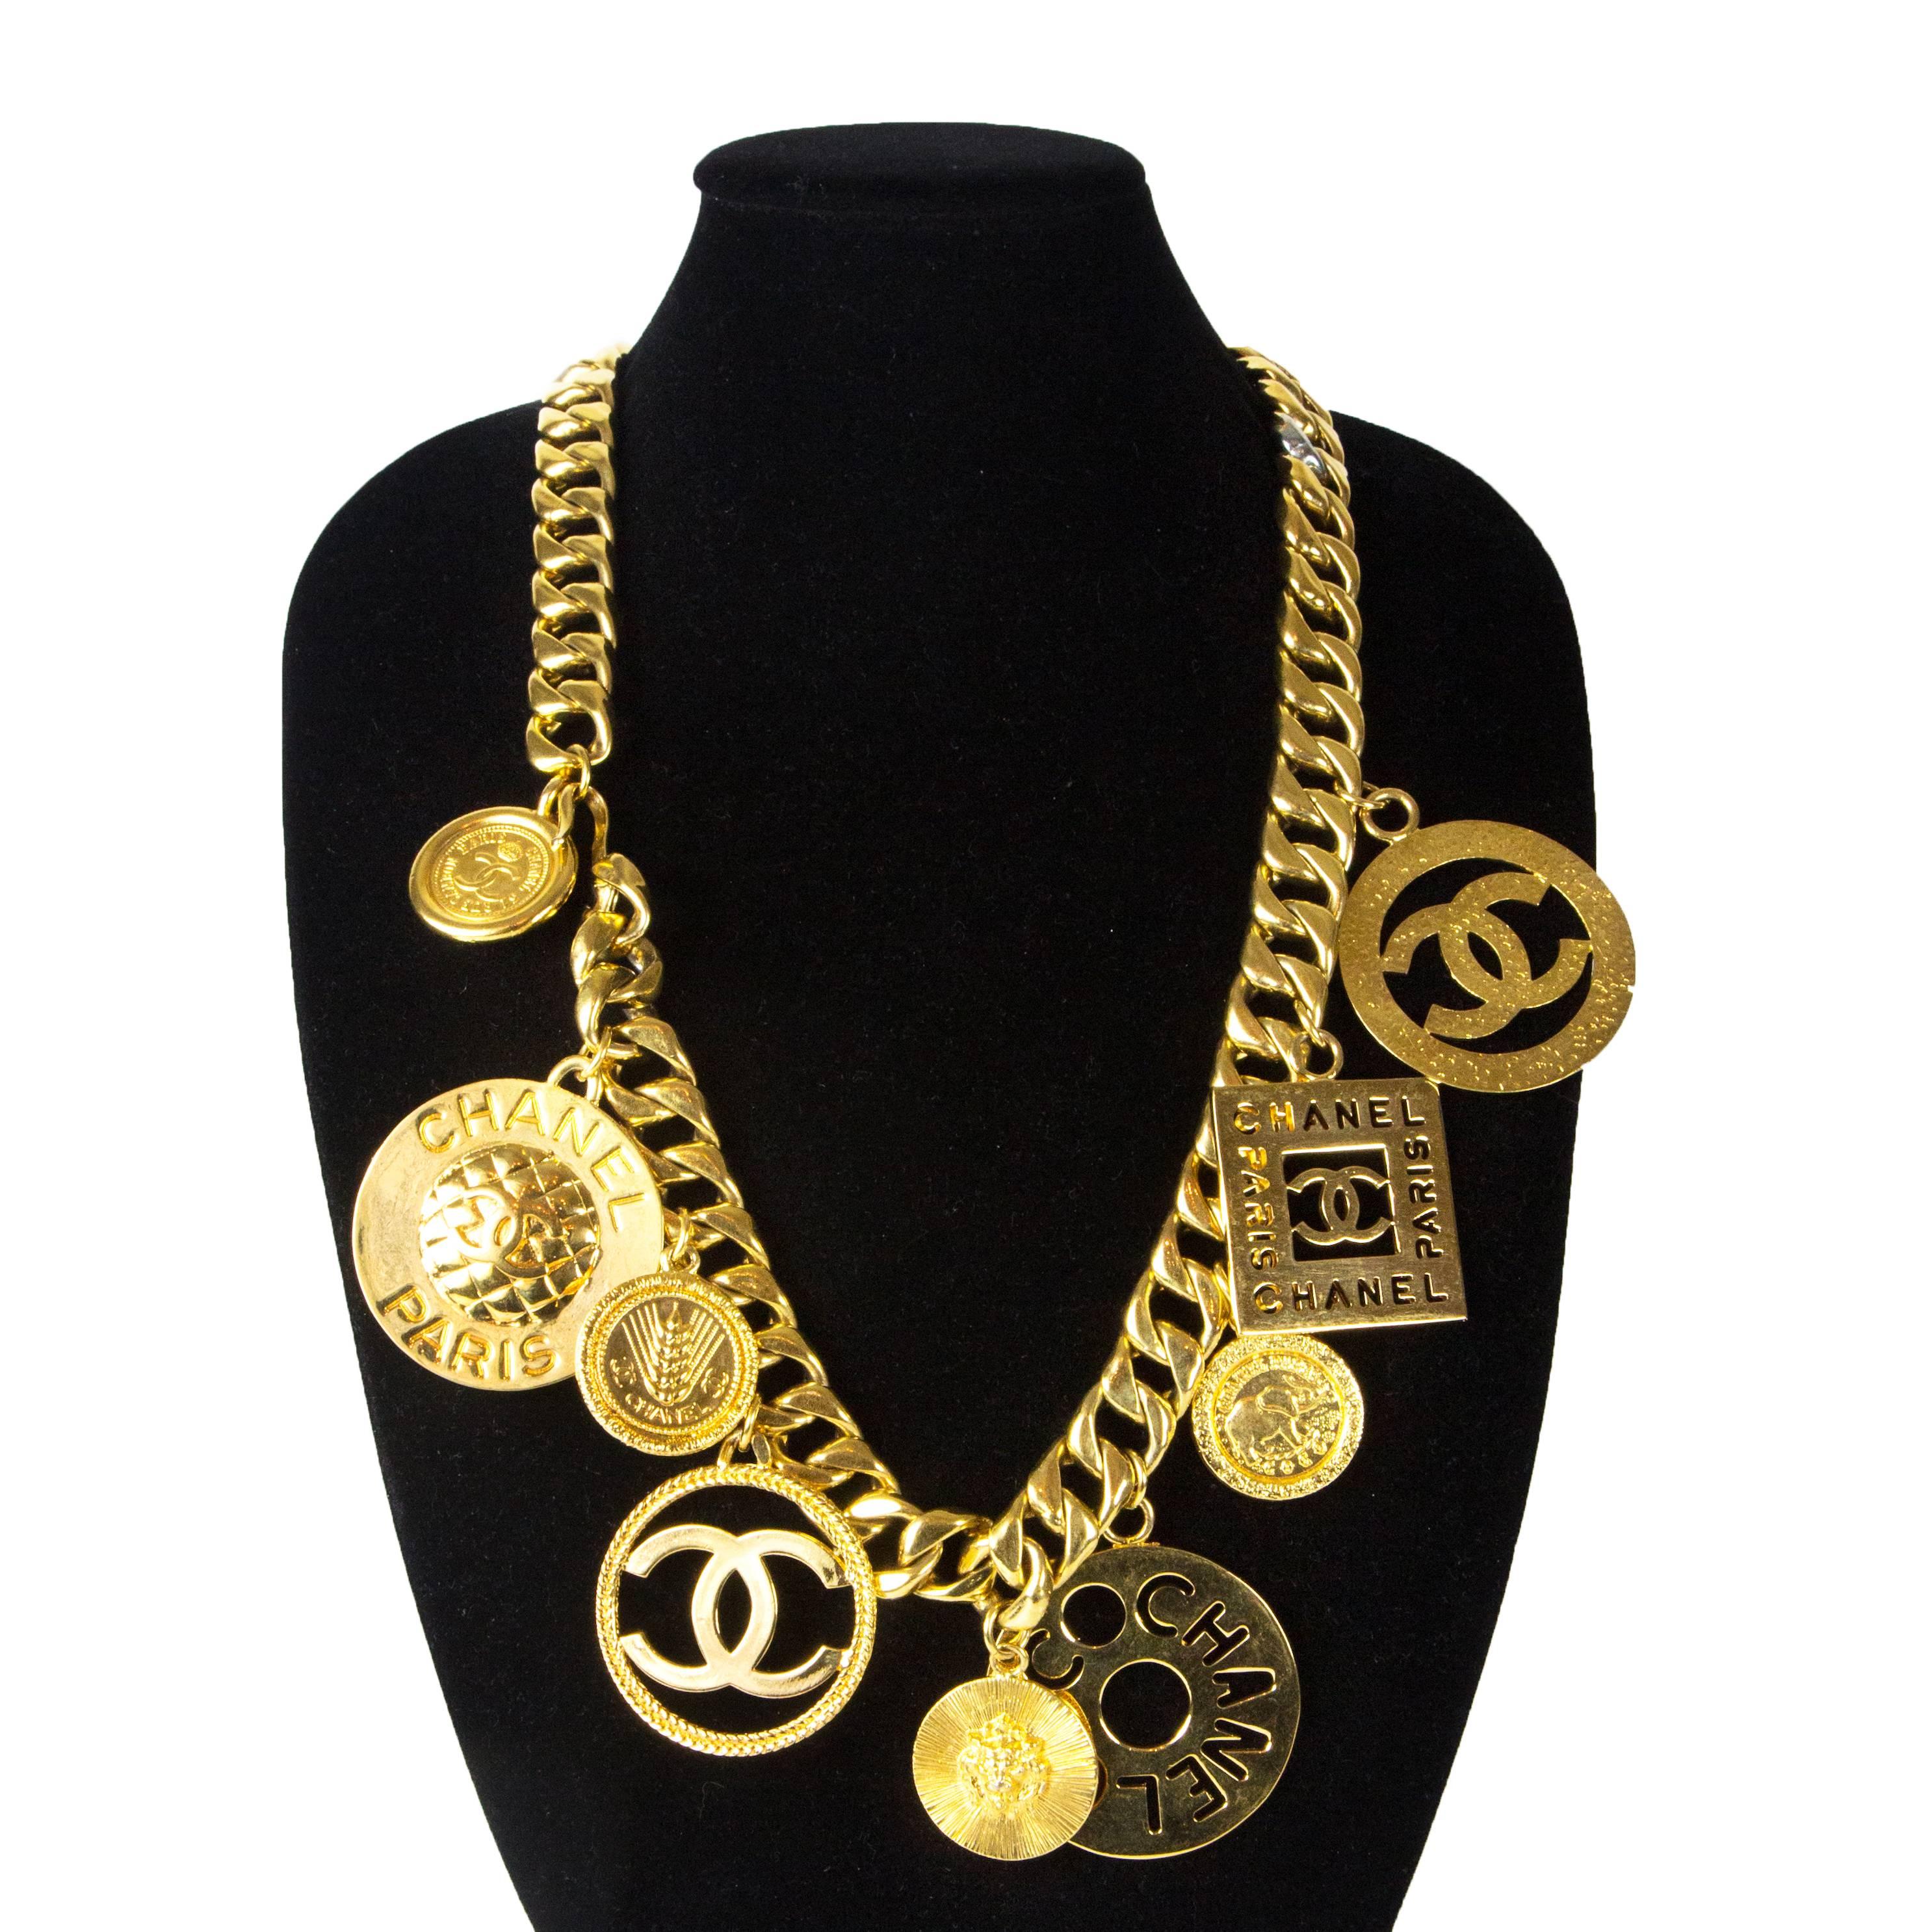 Chanel - Vintage XL Charm Necklace

Color: Gold

Material: Metal

------------------------------------------------------------

Details:

- gold tone hardware

- oversized medallion charms

- cc and chanel logos throughout

- hook